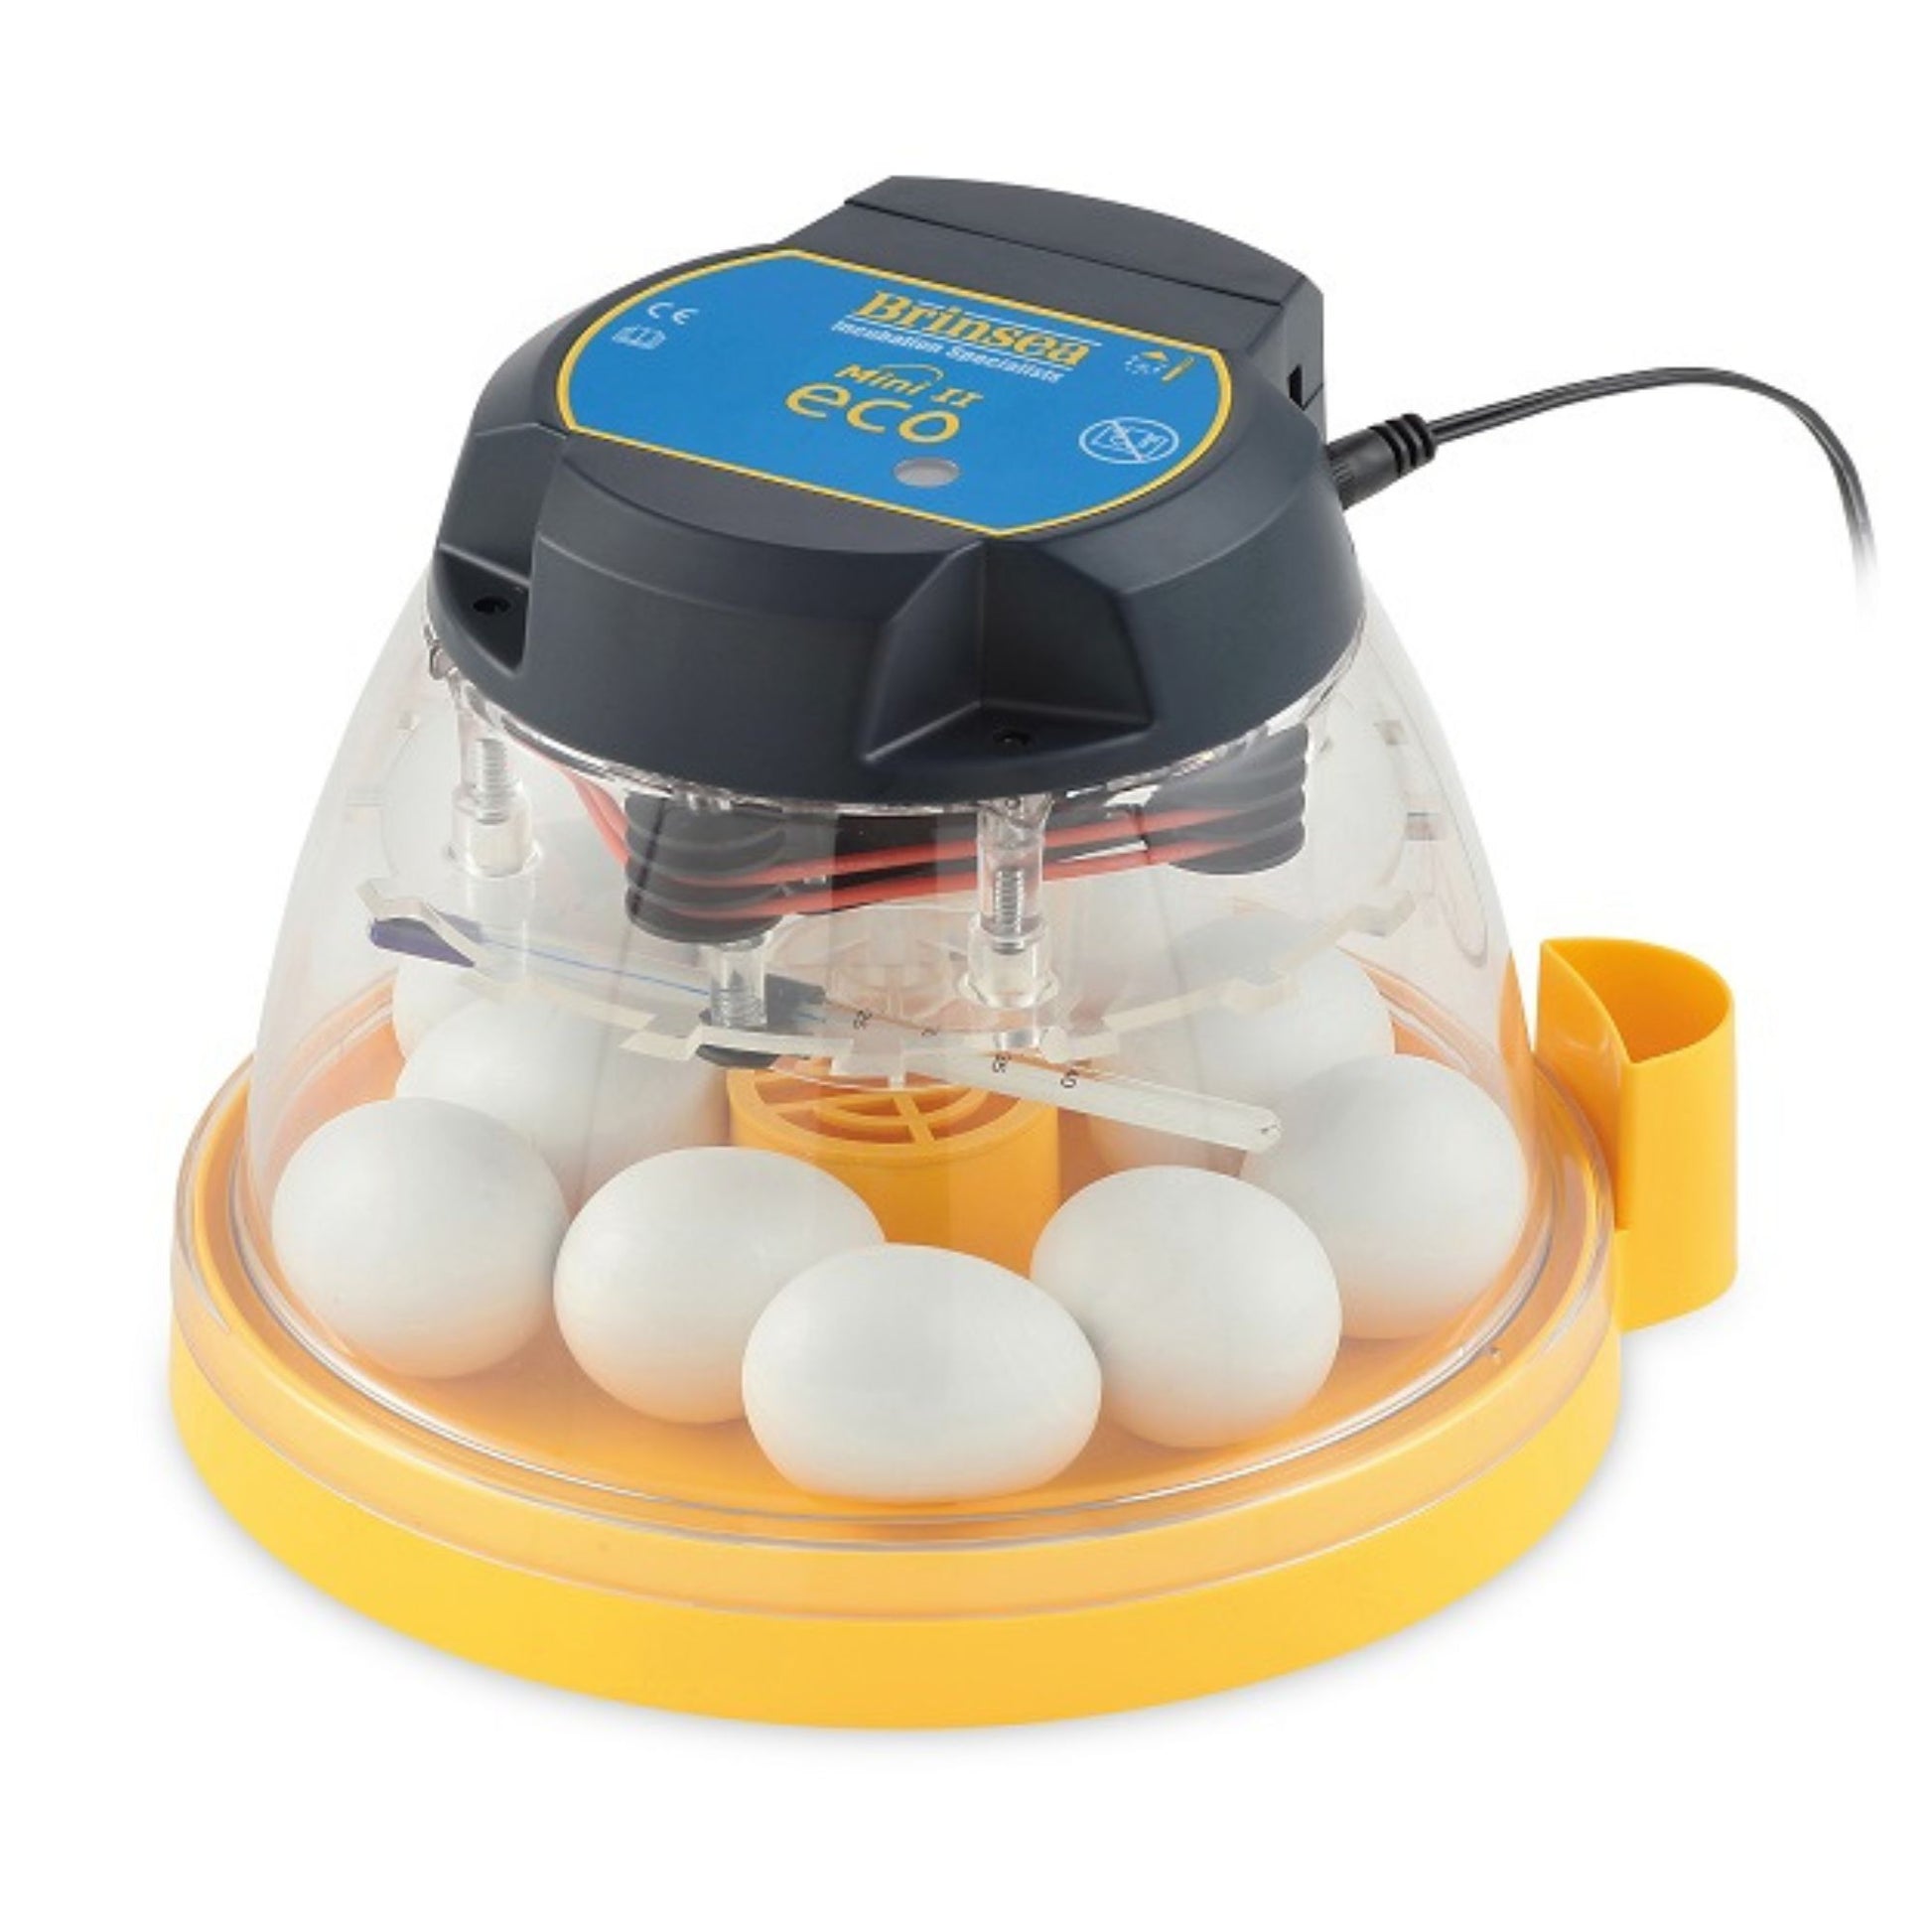 The Brinsea Mini II Eco Incubator is a best seller at My Pet Chicken. 